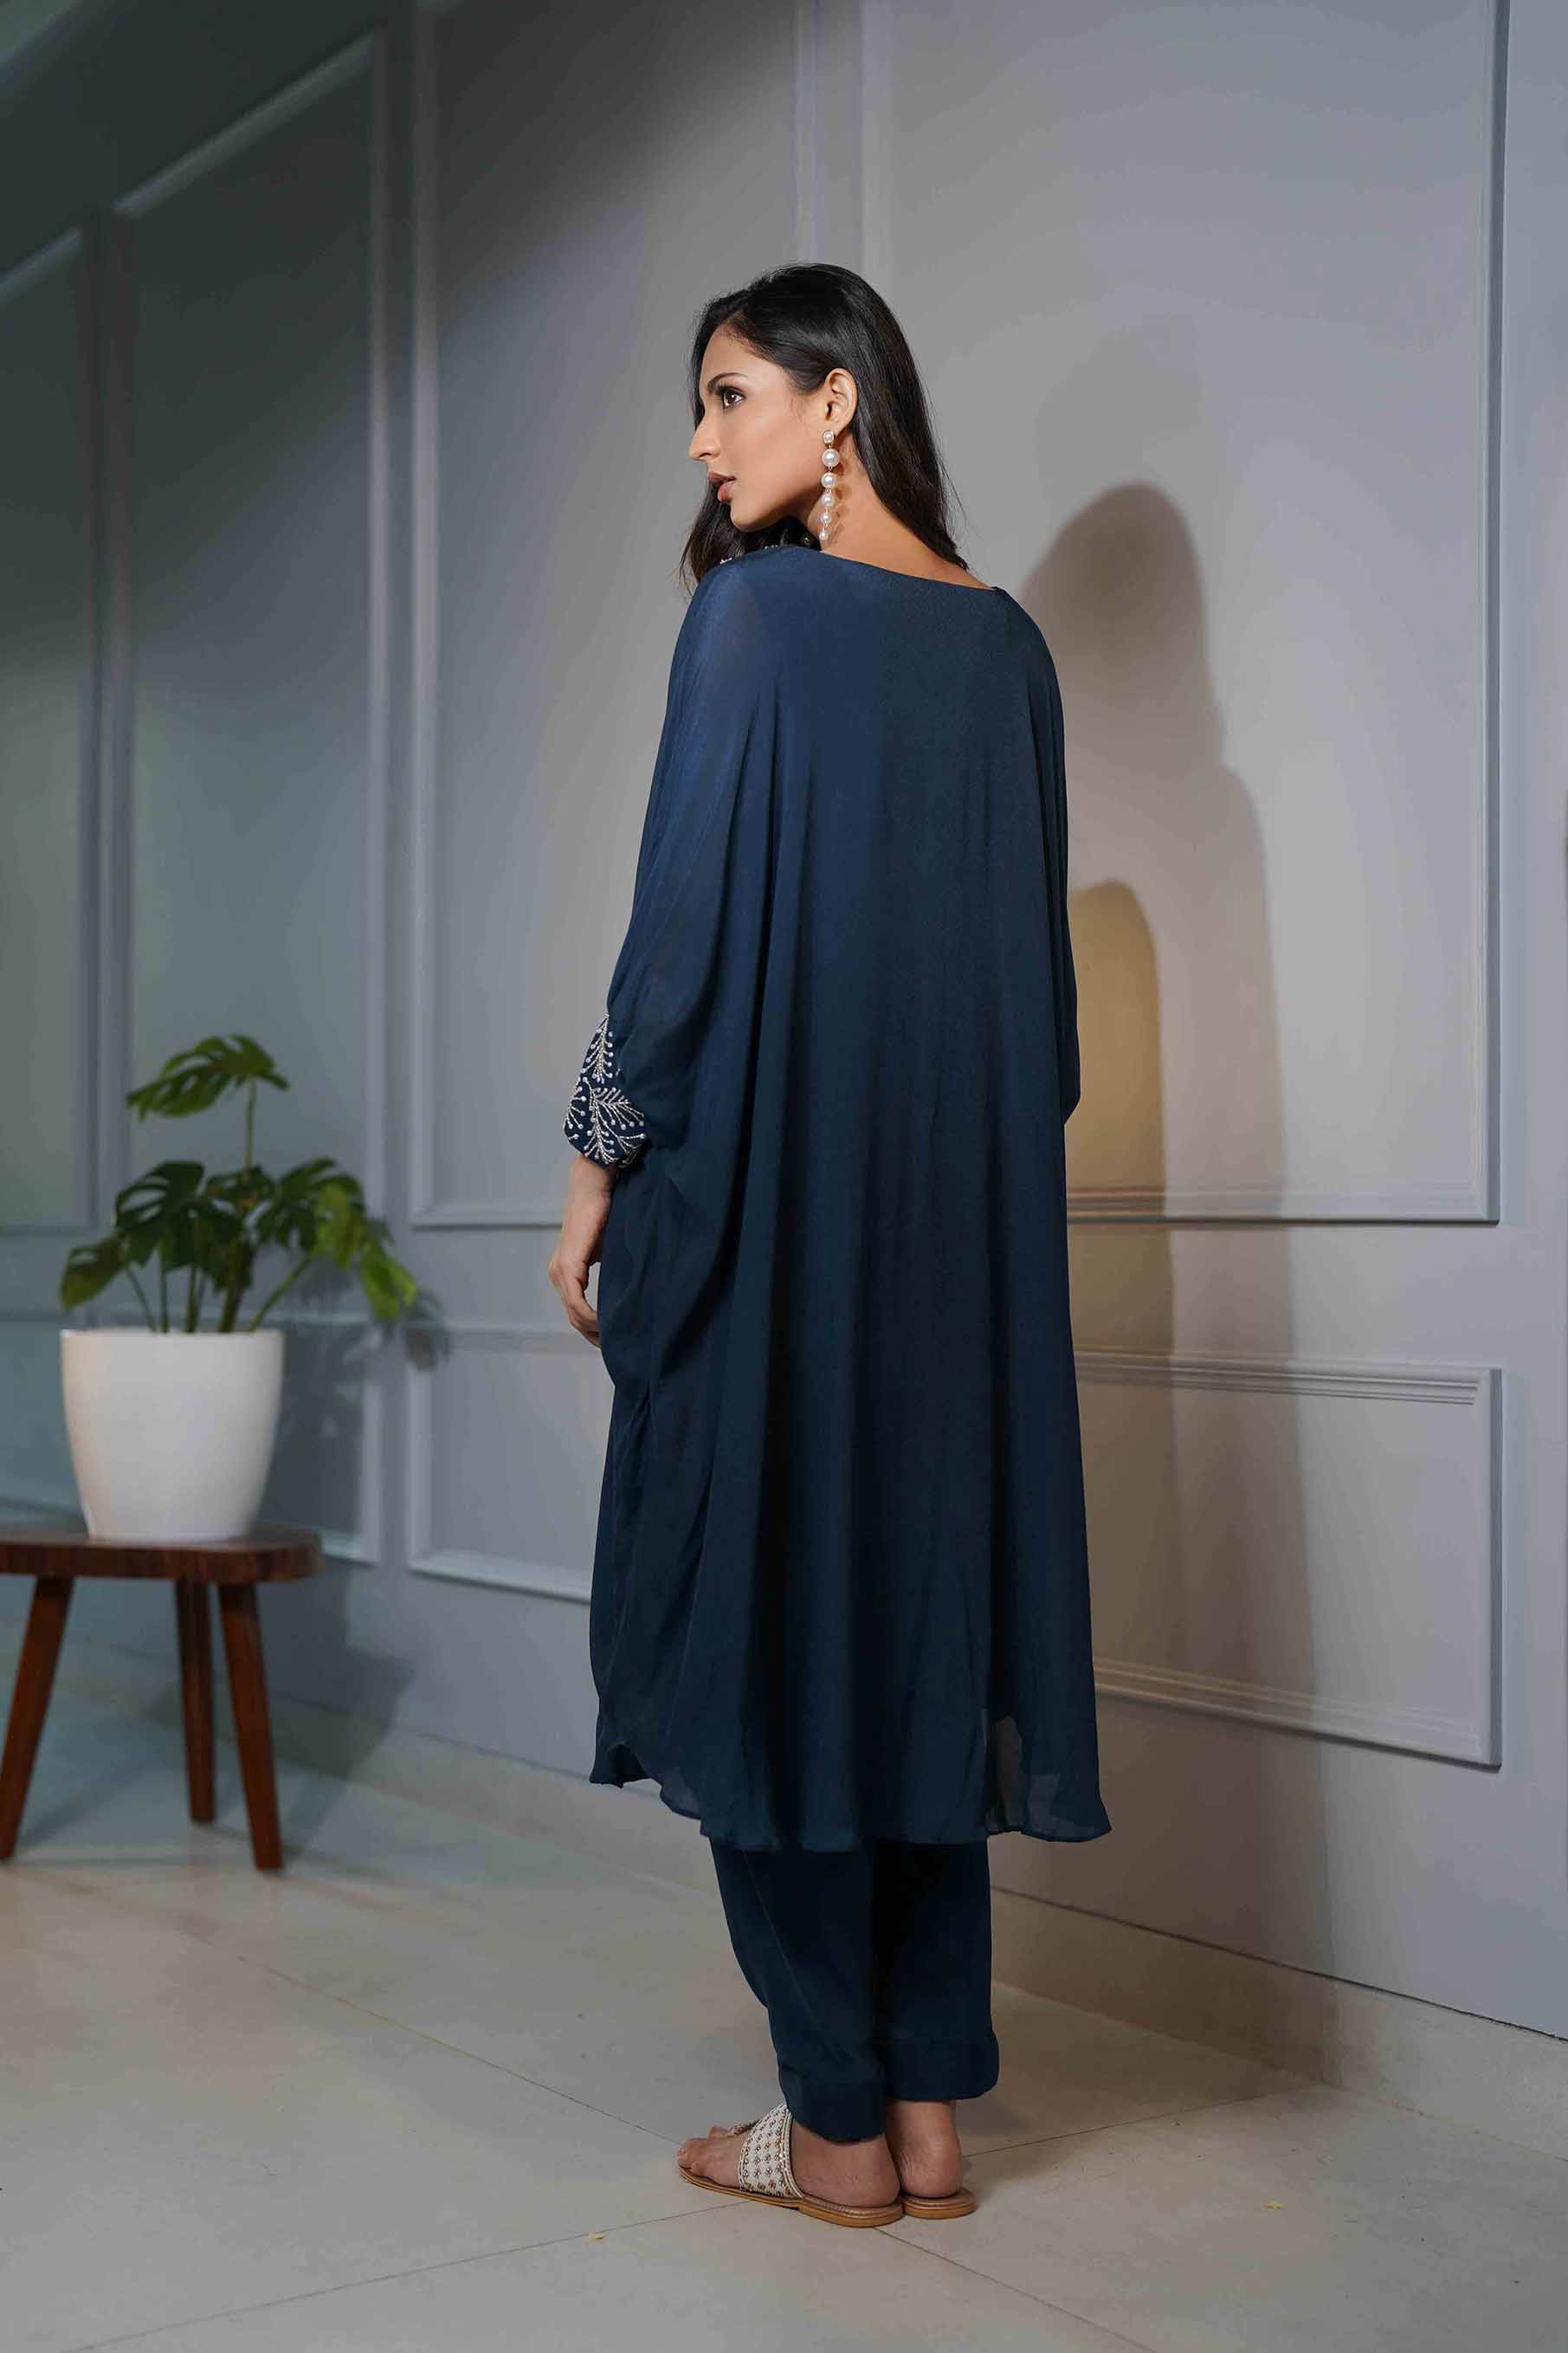 Teal blue flared poncho style tunic with dhoti pants.